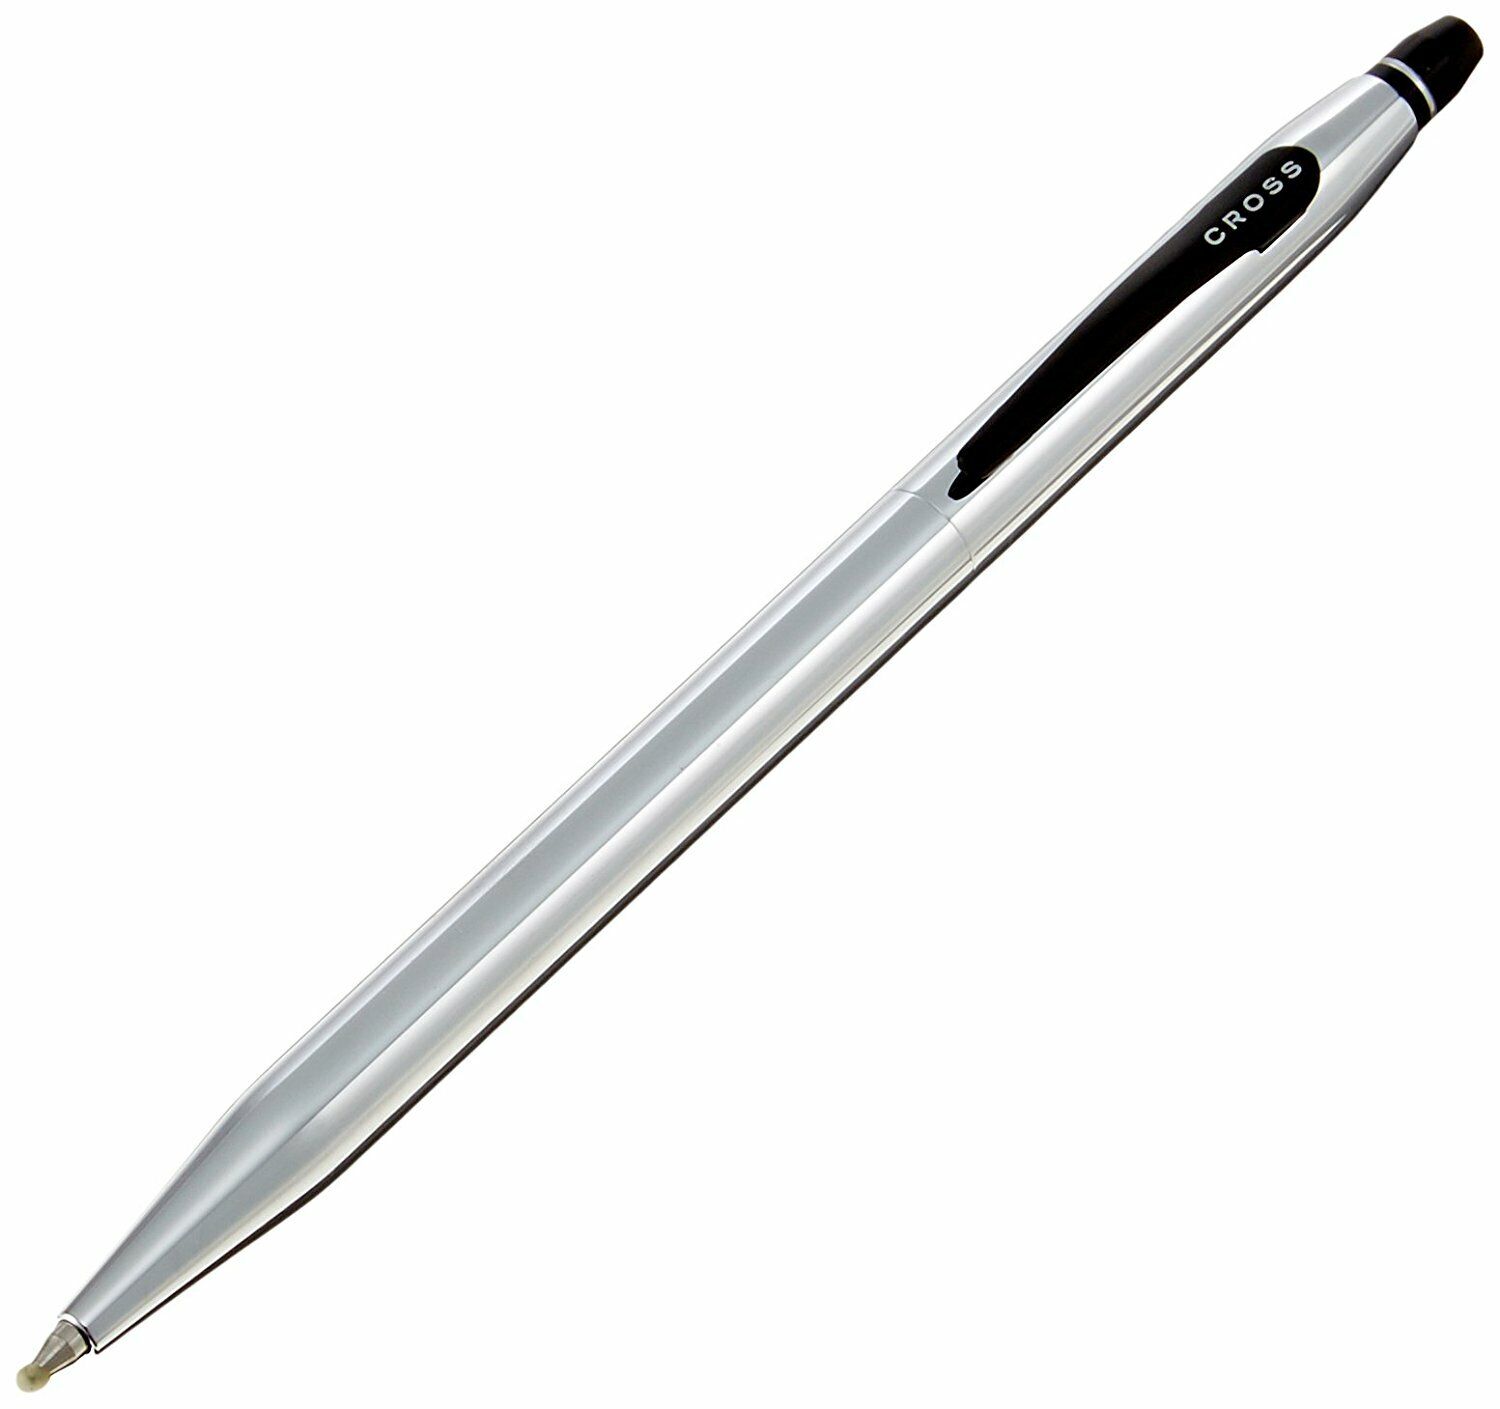 Cross Click Polished Chrome with Black Trim Gel Pen (AT0625-1) - New in Box